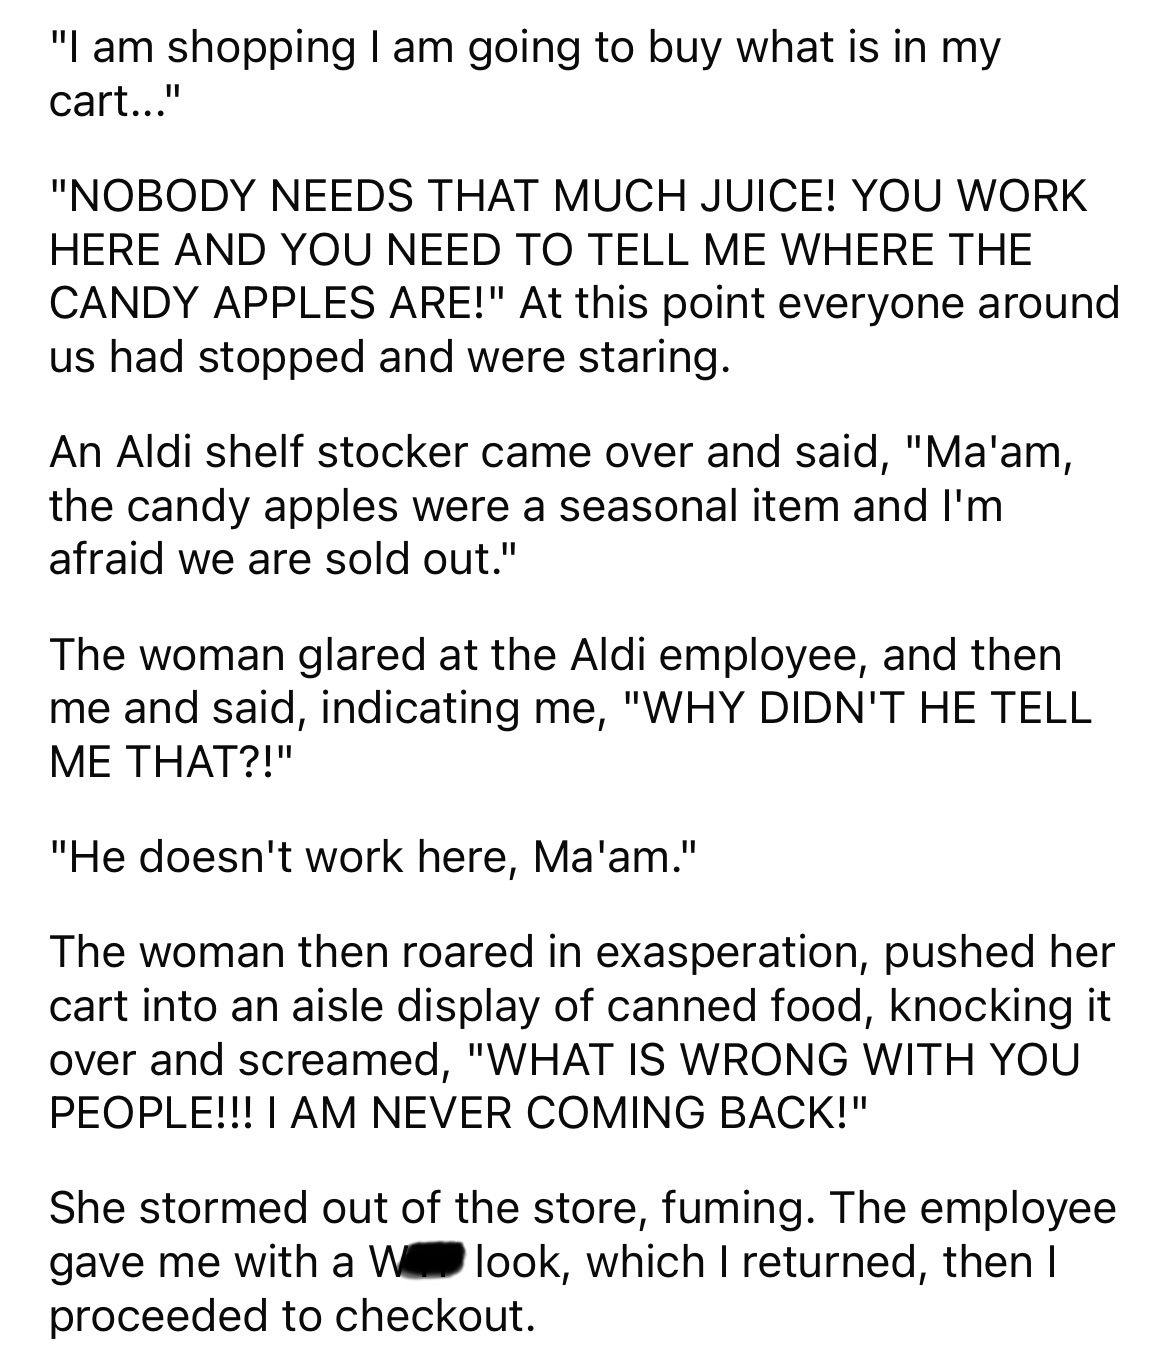 document - "I am shopping I am going to buy what is in my cart..." "Nobody Needs That Much Juice! You Work Here And You Need To Tell Me Where The Candy Apples Are!" At this point everyone around us had stopped and were staring. An Aldi shelf stocker came 